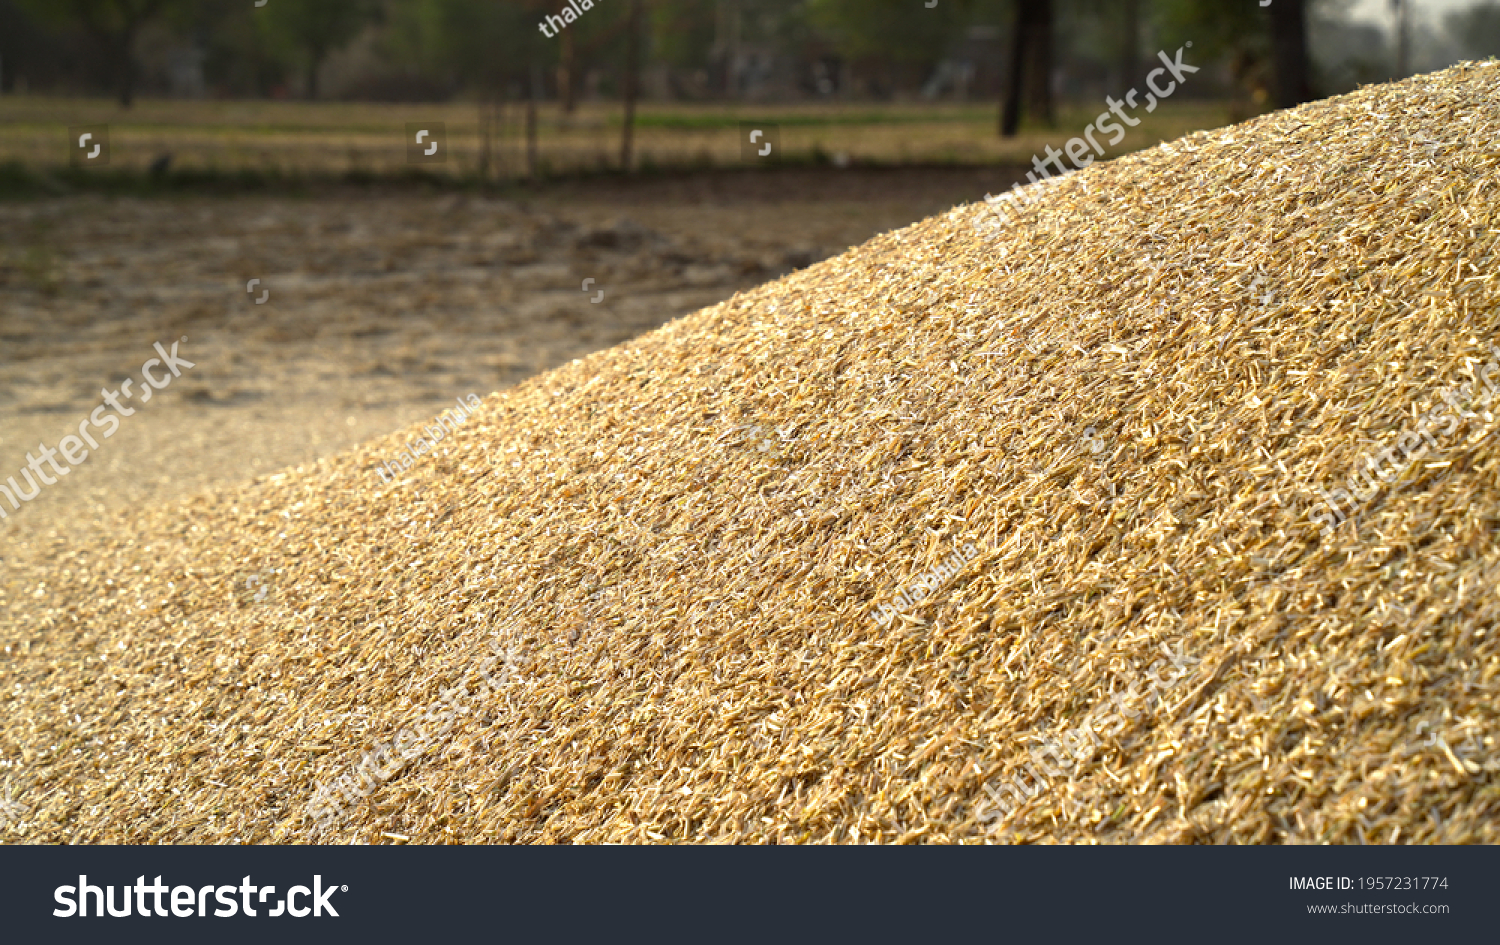 Piles of wheat straw for animals fodder use. Mountain fodder straw use for animal feeding. #1957231774